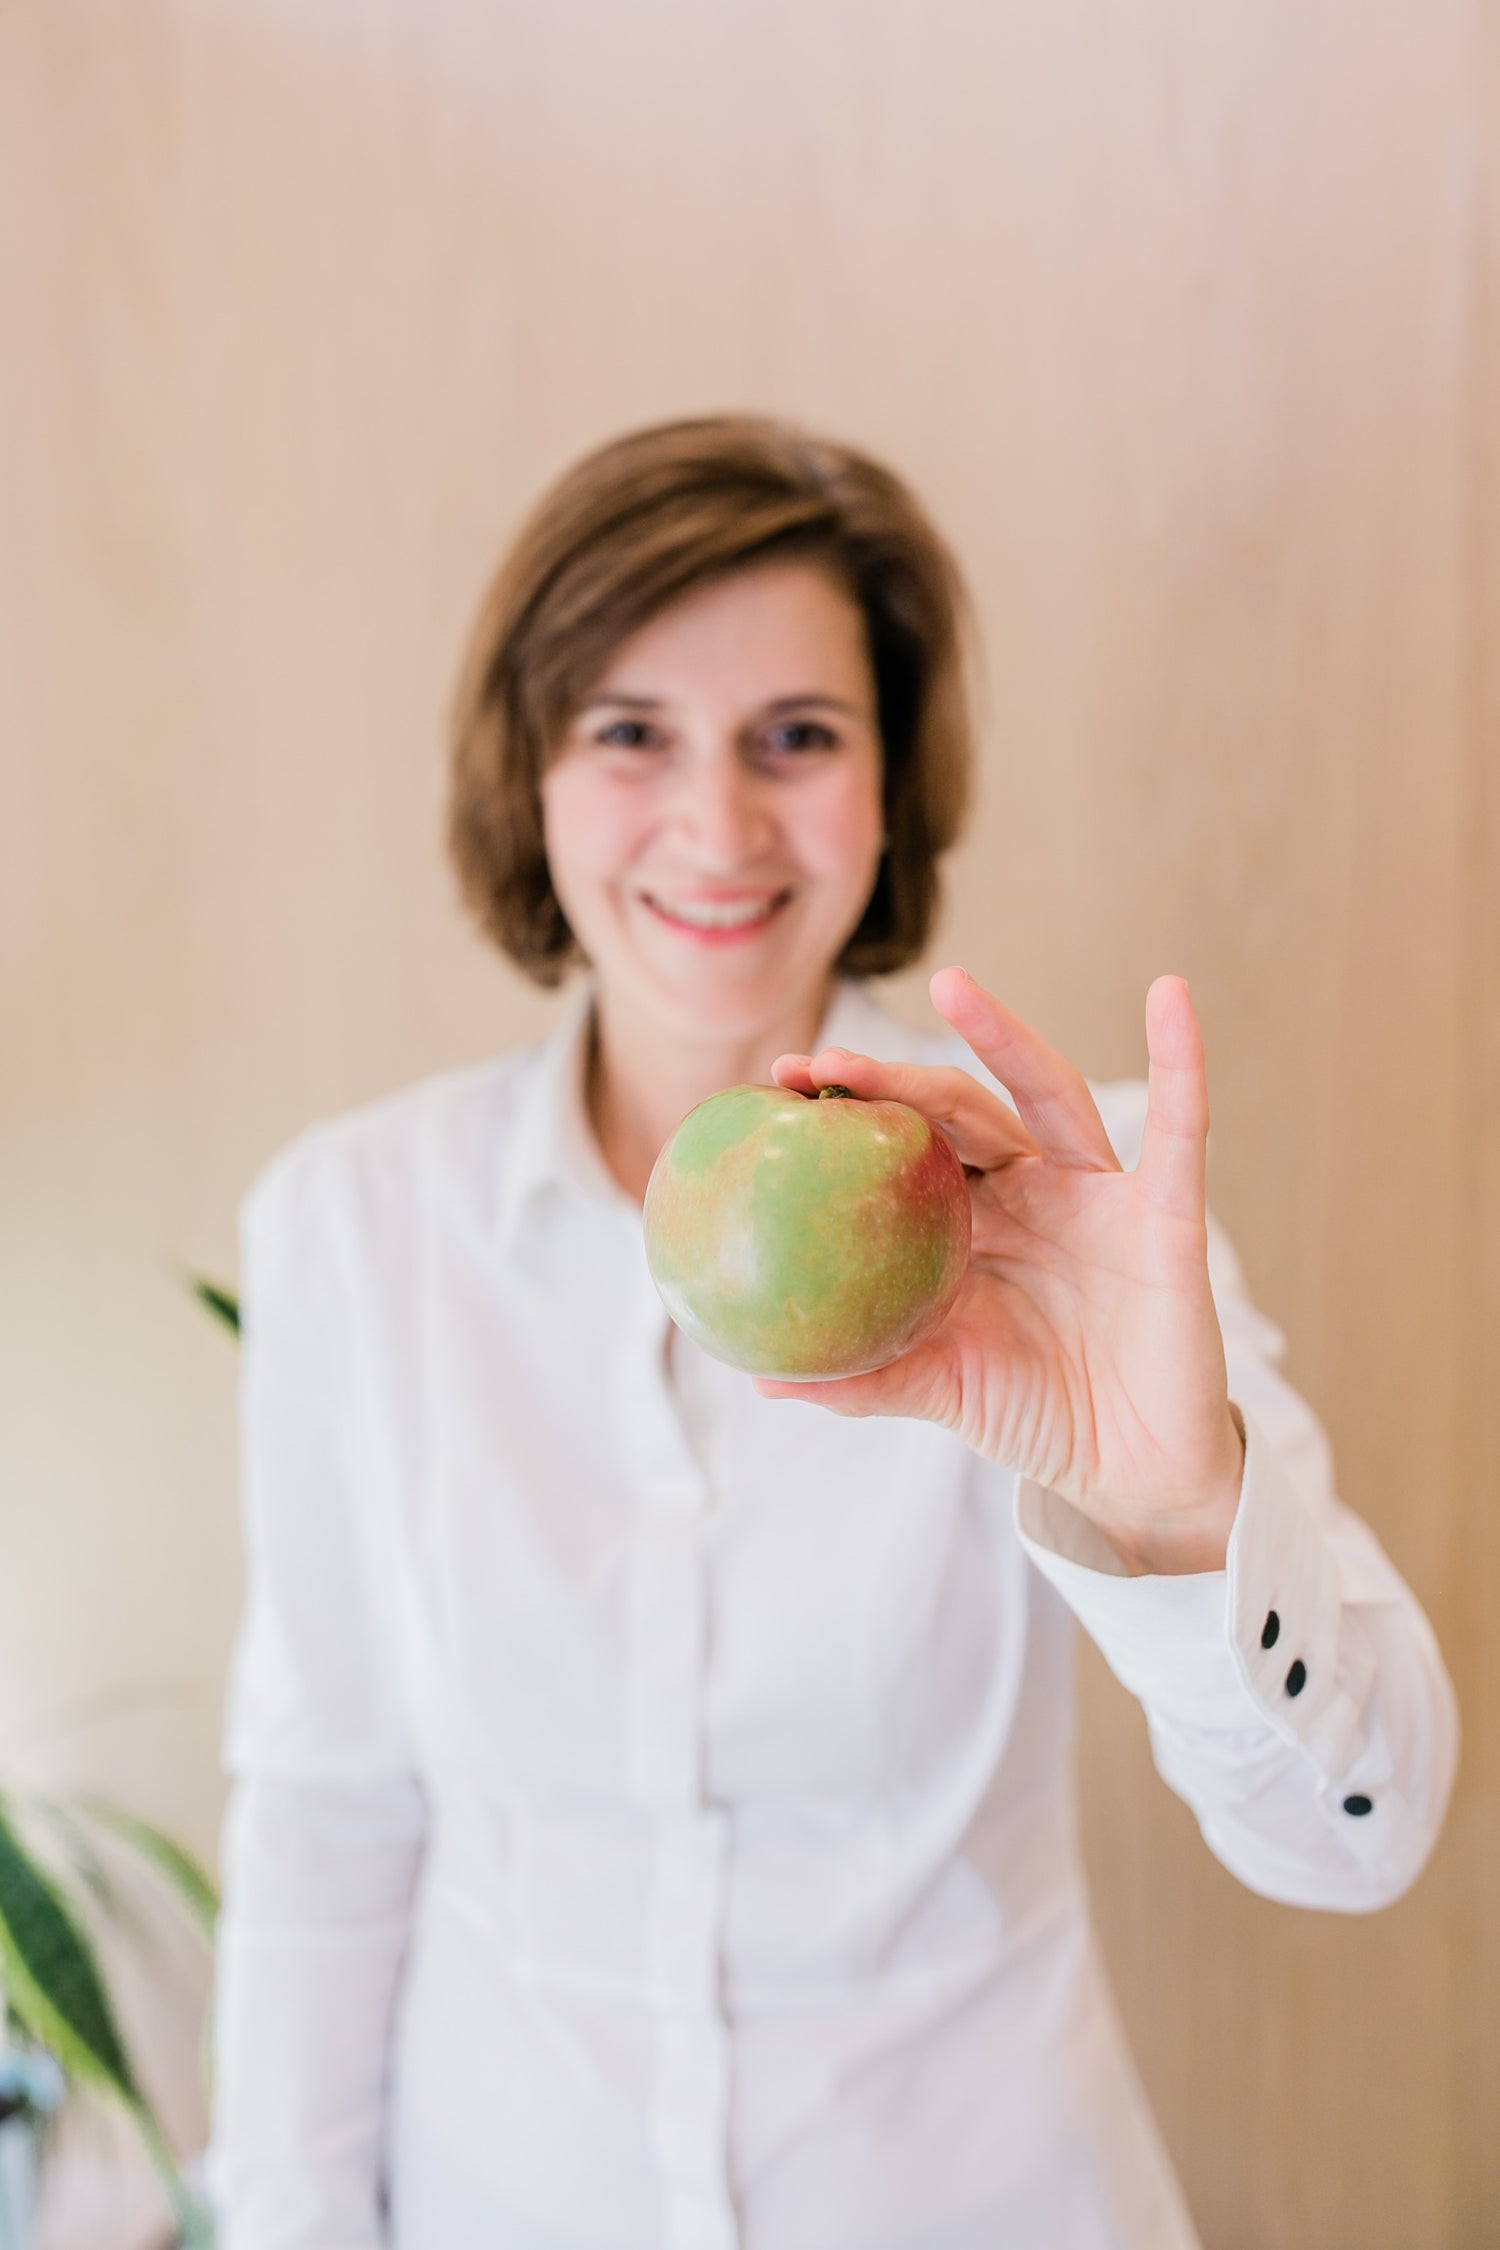 A brown-haired woman in a white shirt holds up an apple to encourage holistic health and nutrition